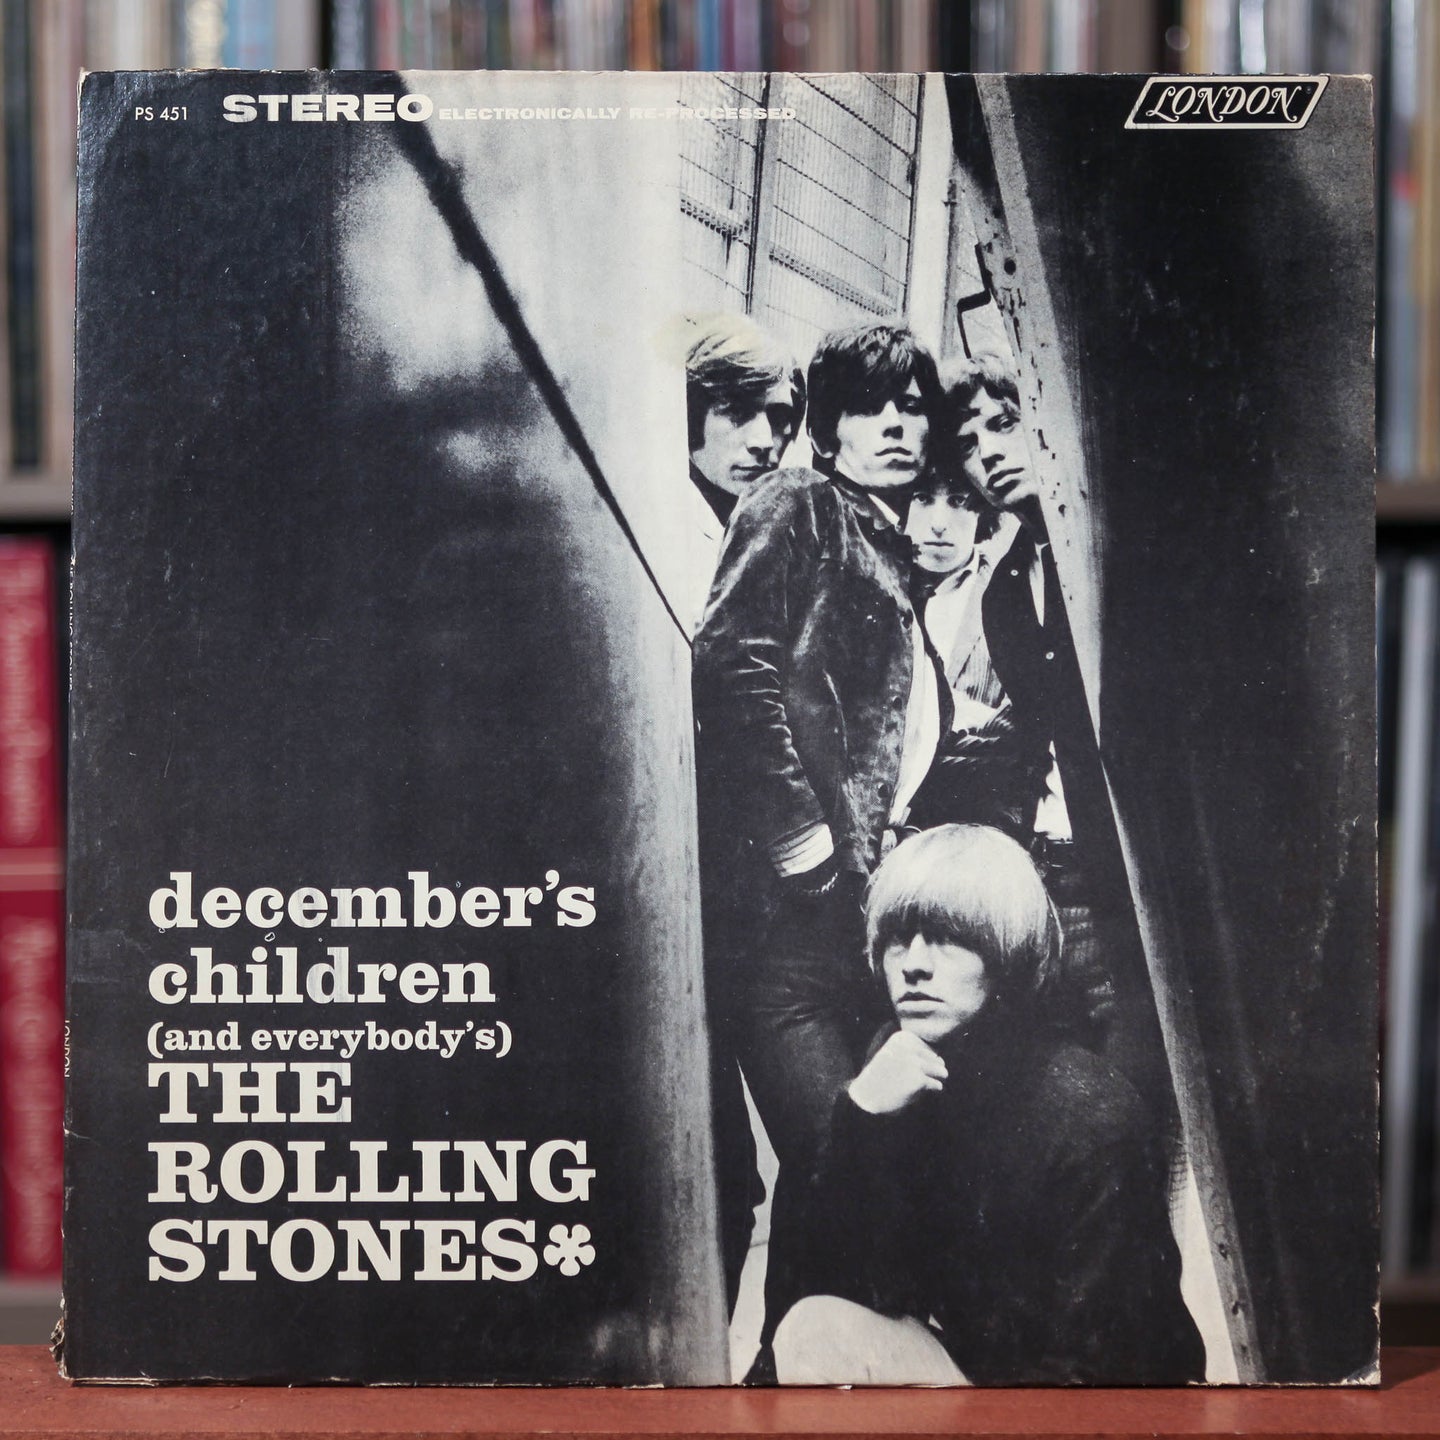 Rolling Stones - December's Children (And Everybody's) - 1965 London, VG/EX